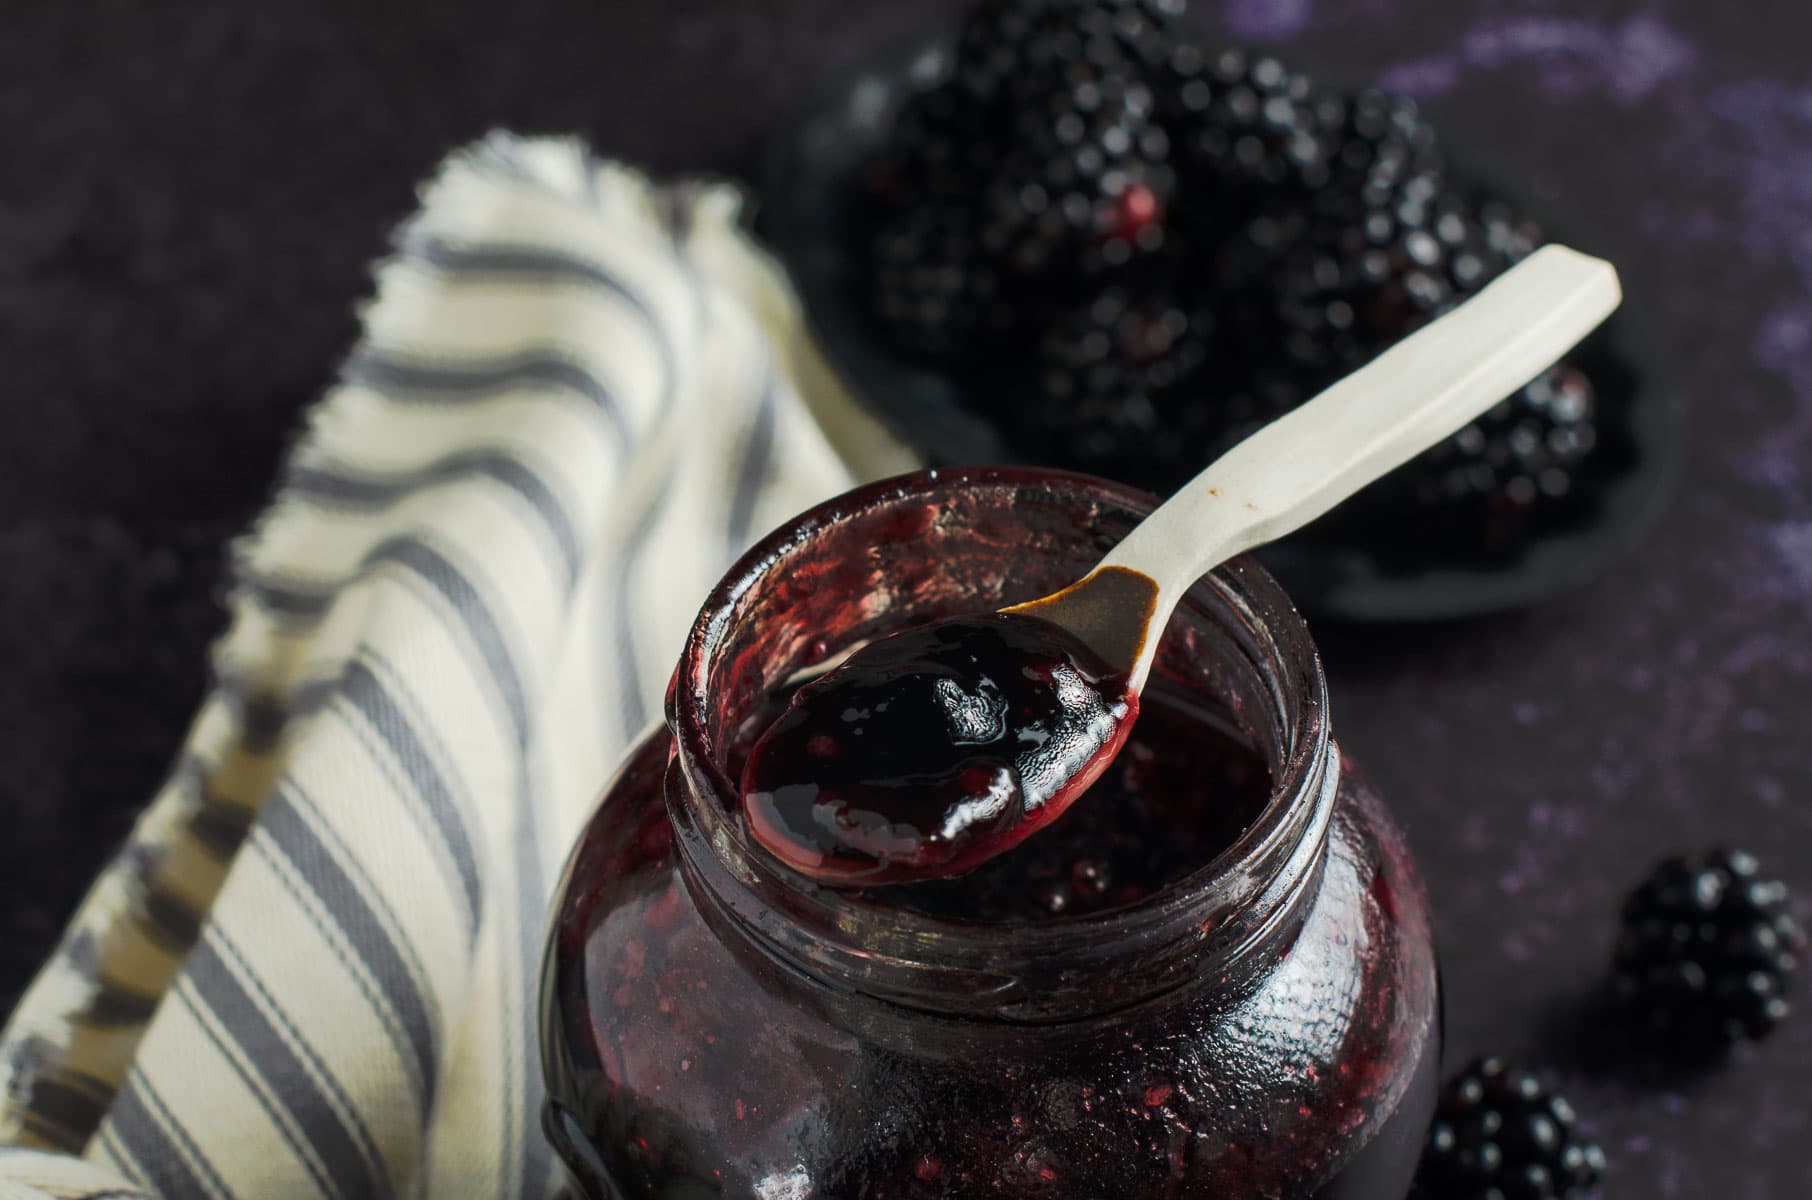 A round jar of blackberry jelly with a small ceramic spoon on the top, some fresh blackberries to the back and side and a striped French linen on a dark background.